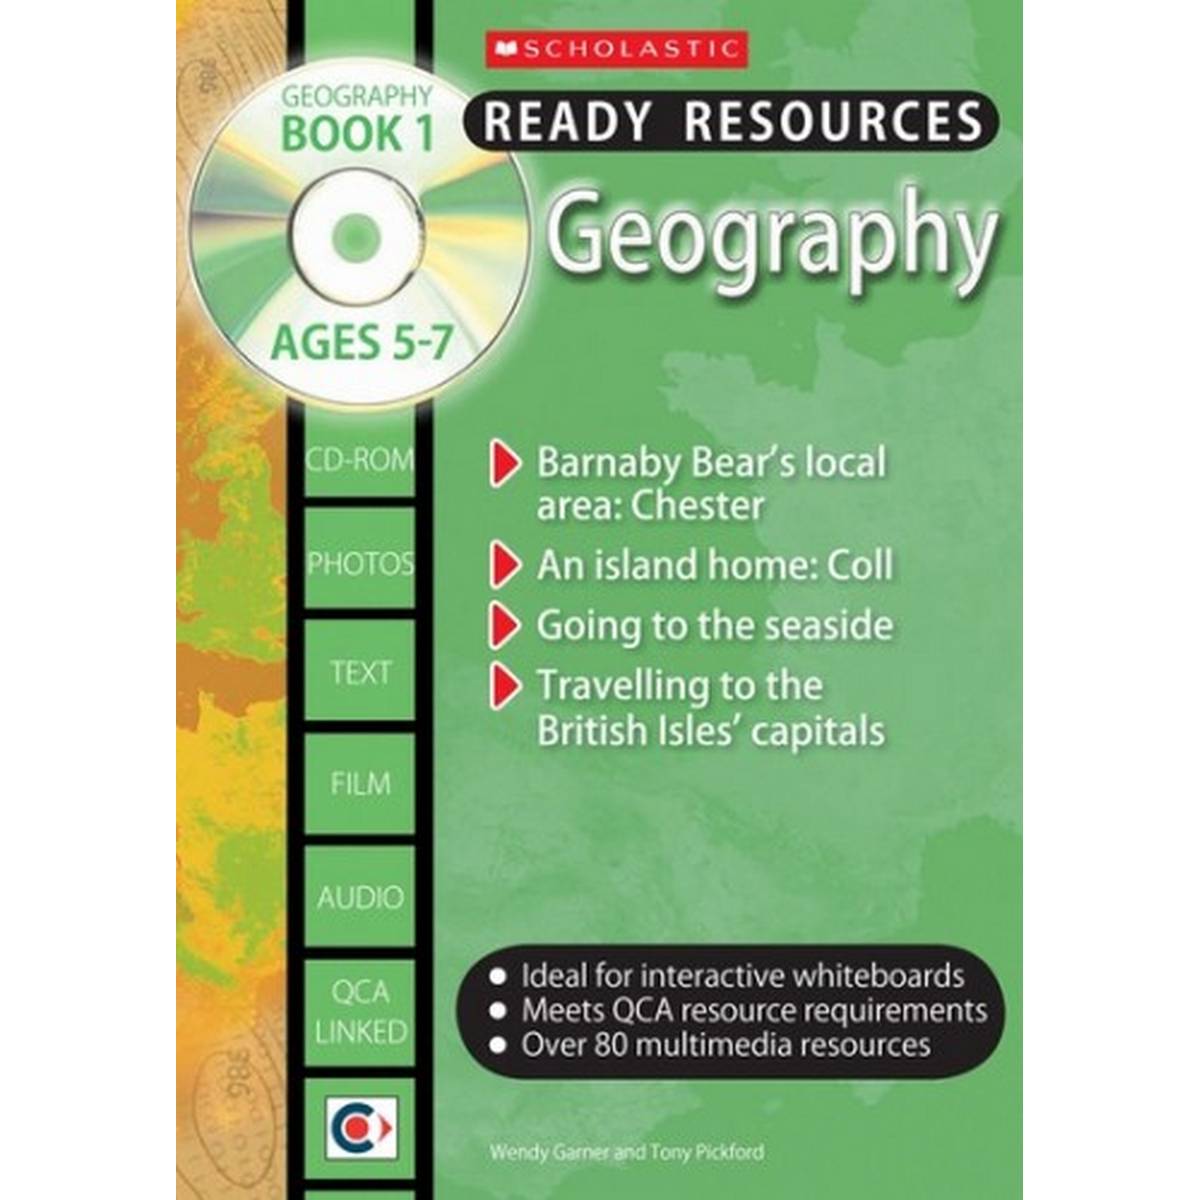 Ready Resources Geography Book 1